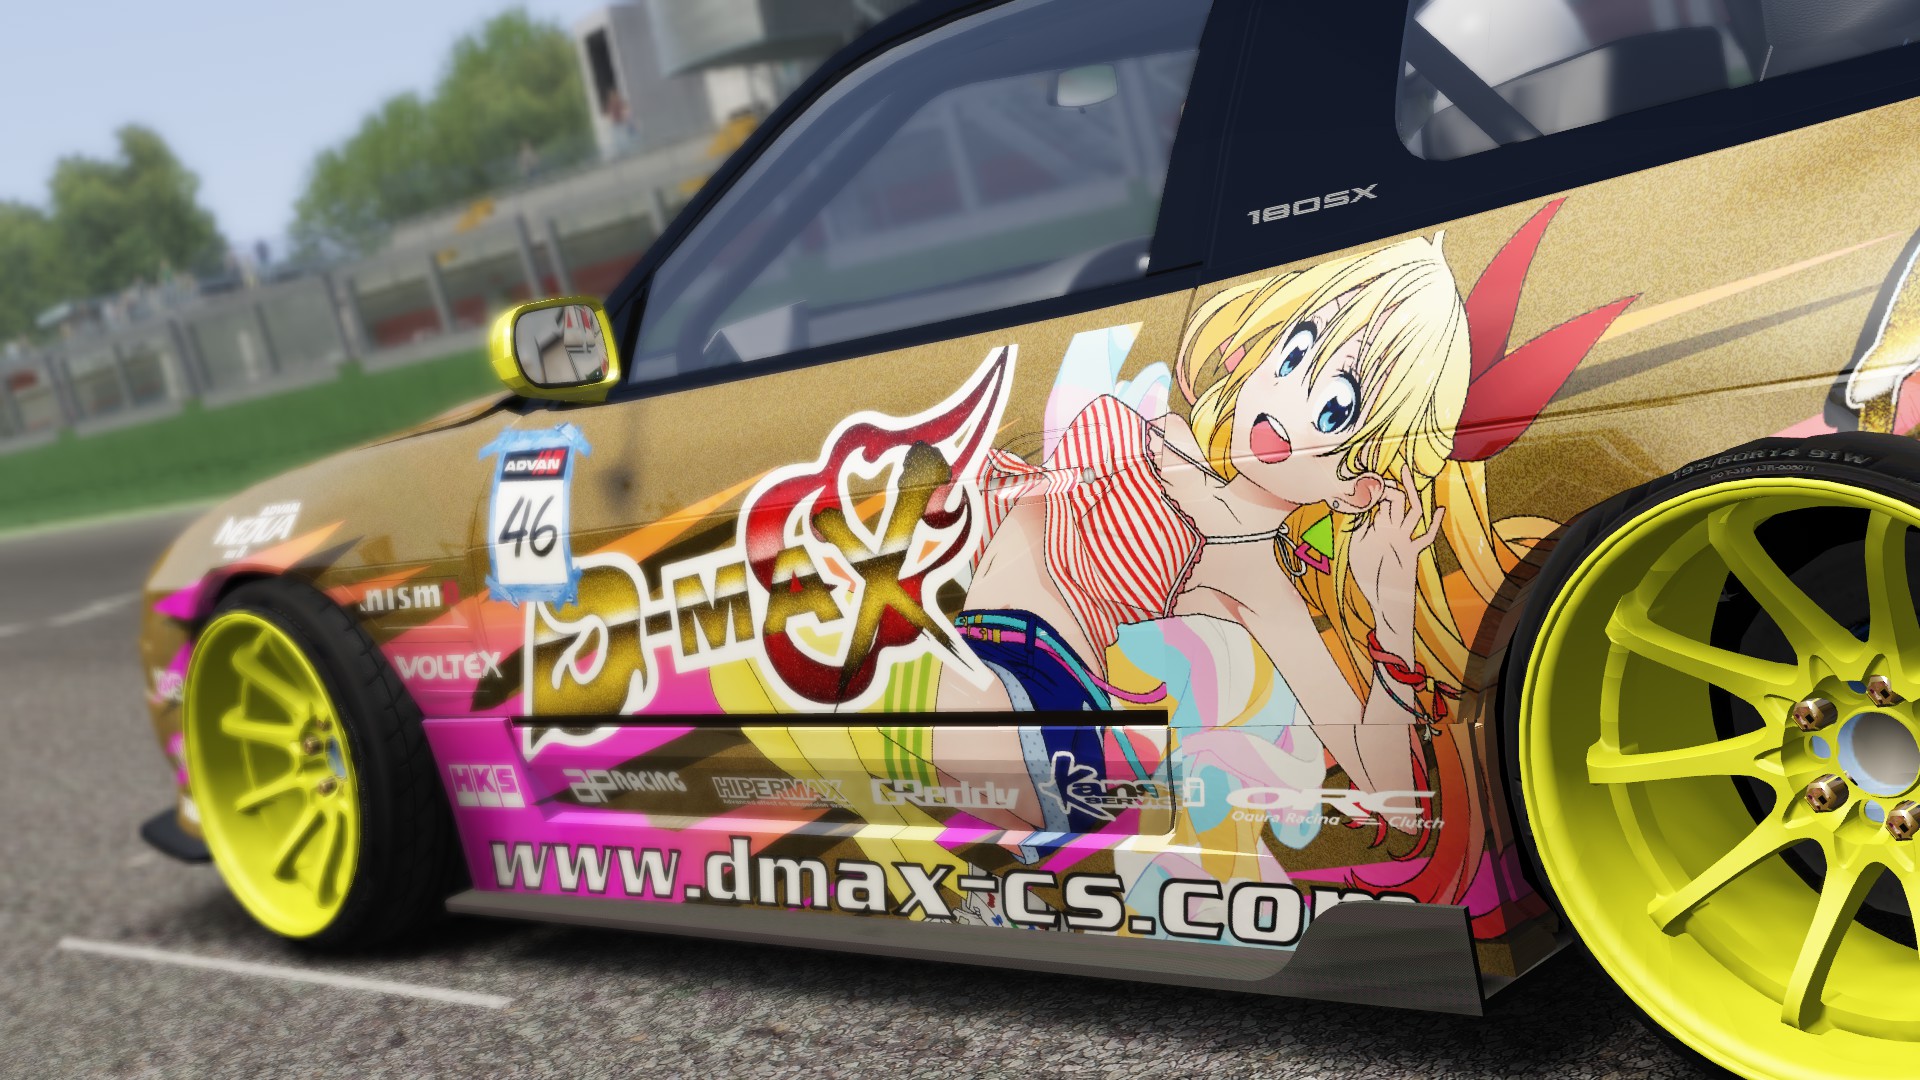 4K Drift / itasha skins for jzx110, jzx100, 180sx and altezza. Pack 03. | RaceDepartment